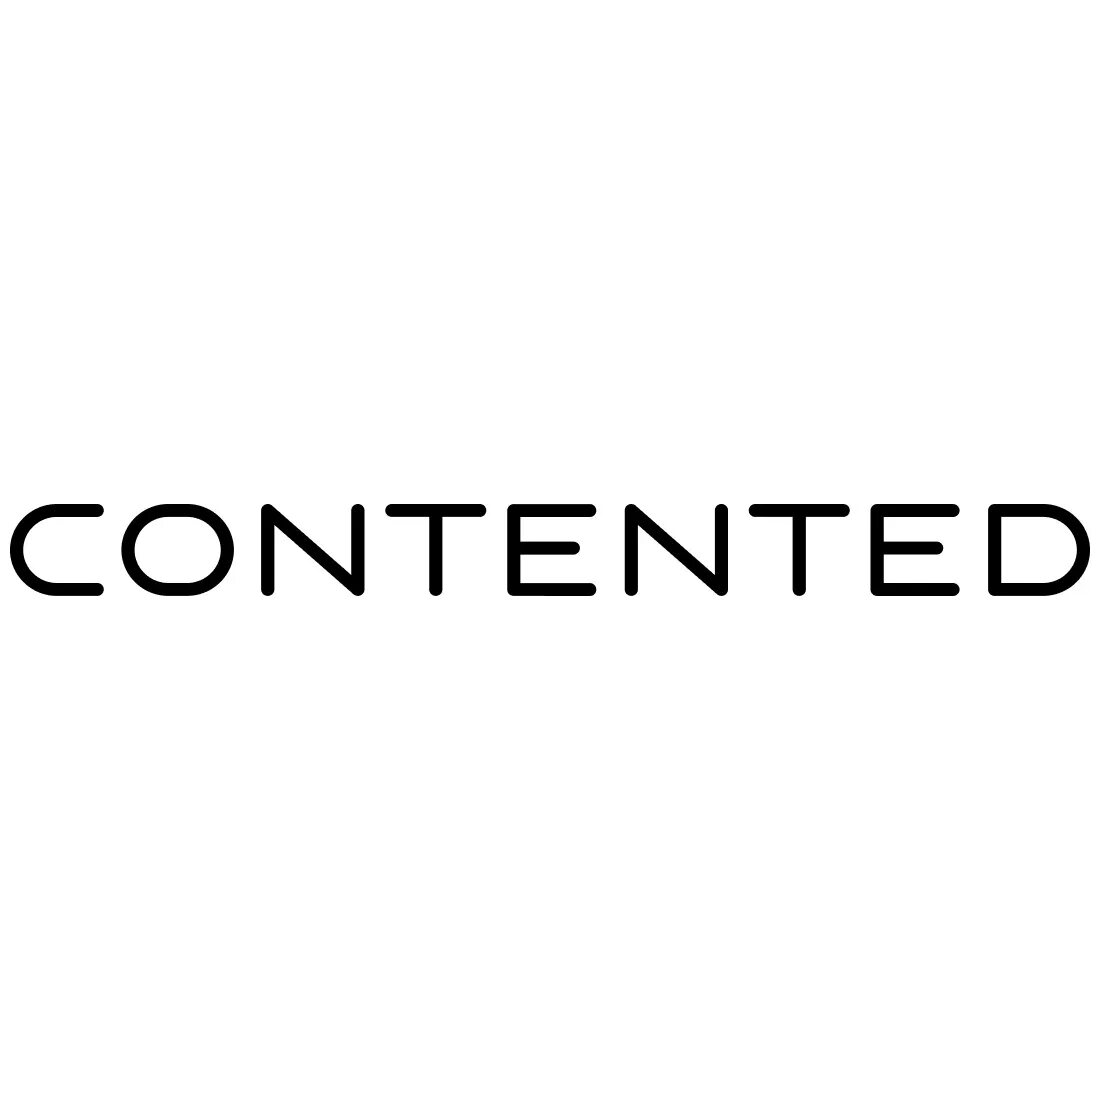 Content school. Contented логотип. Contented школа дизайна. Contented курсы дизайна.